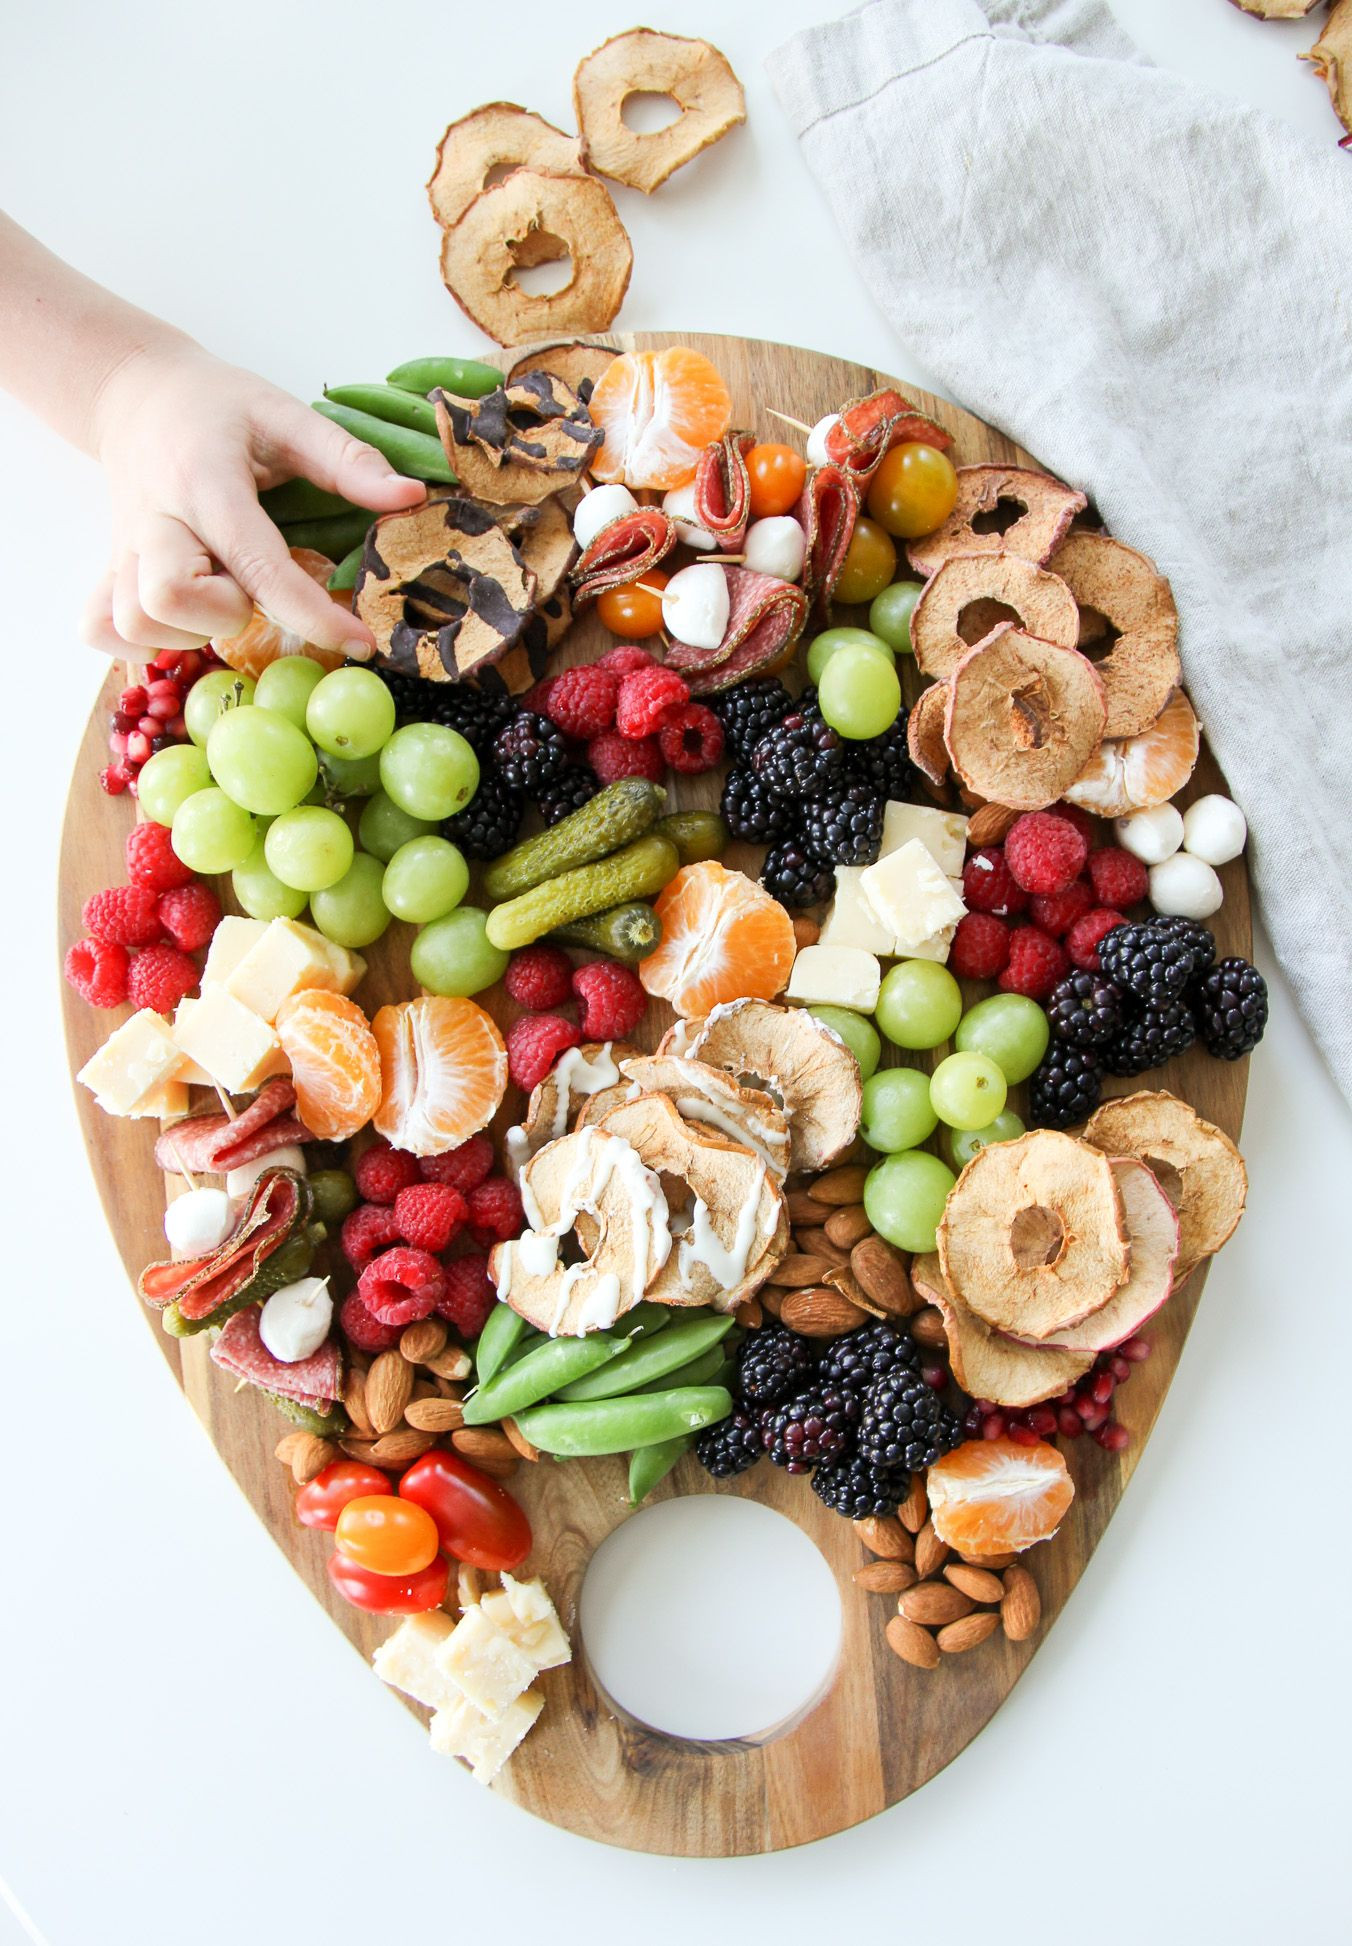 Healthy Appetizers For Kids
 Kid Friendly Snack and Cheese Plate